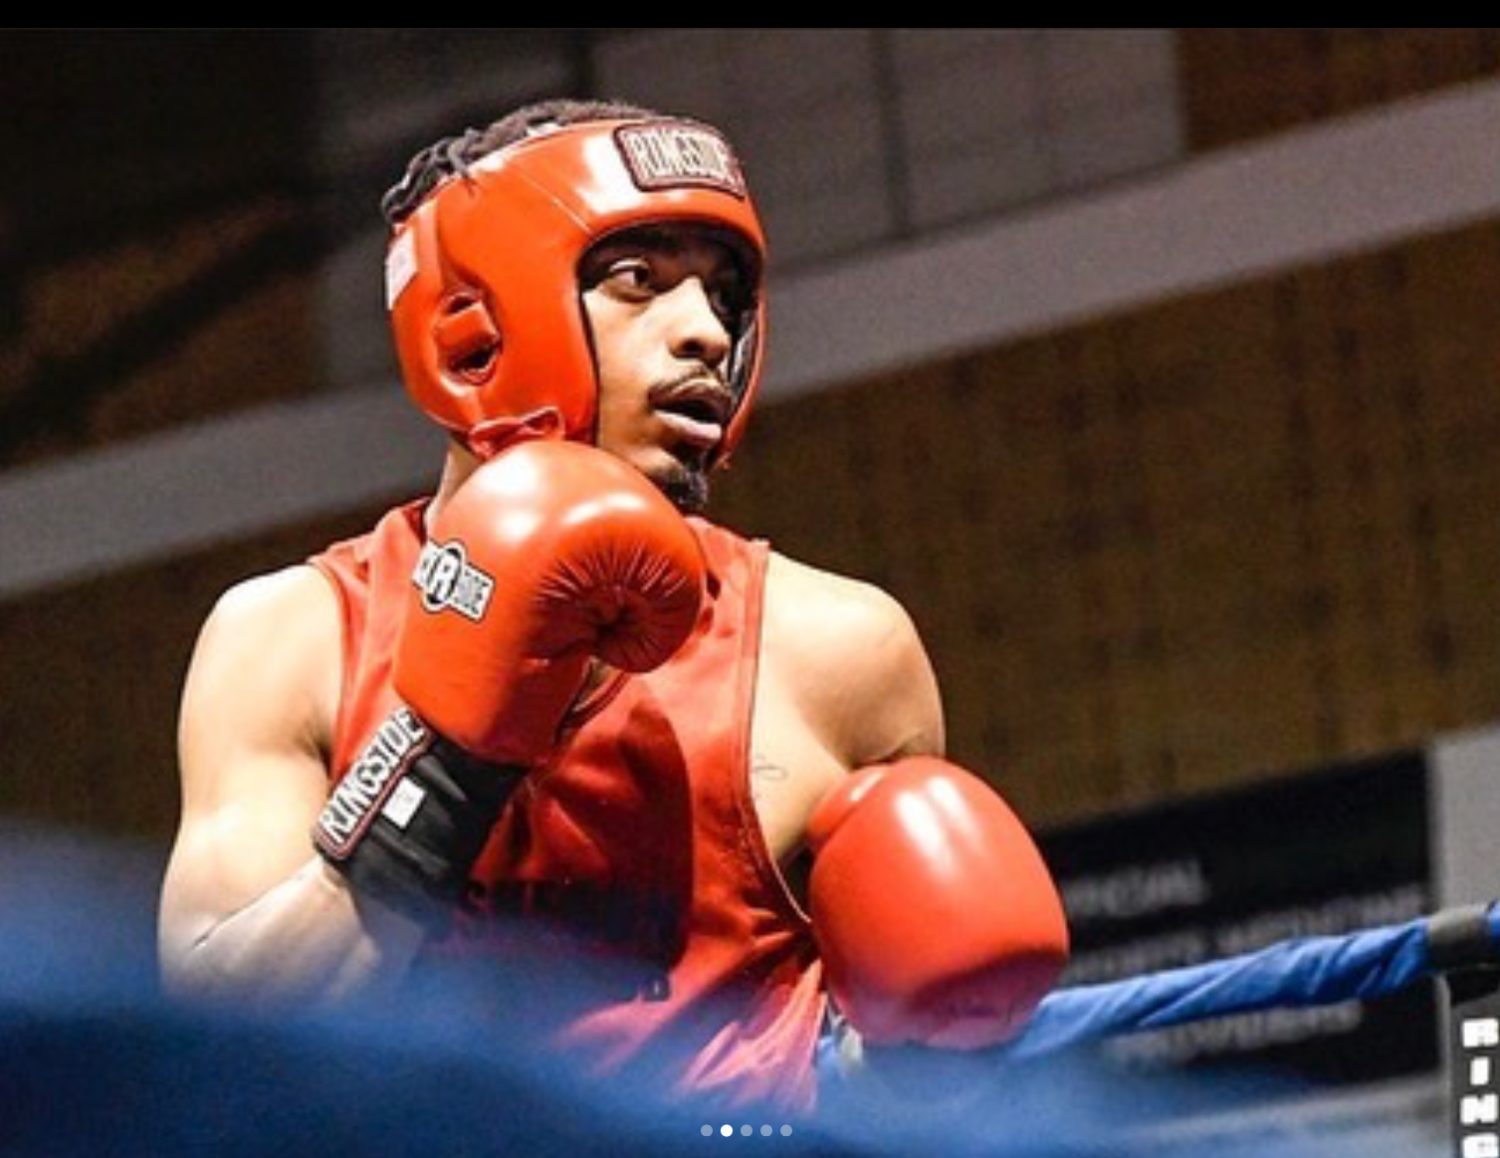 Local boxer Partee punches his ticket to Golden Gloves Nationals